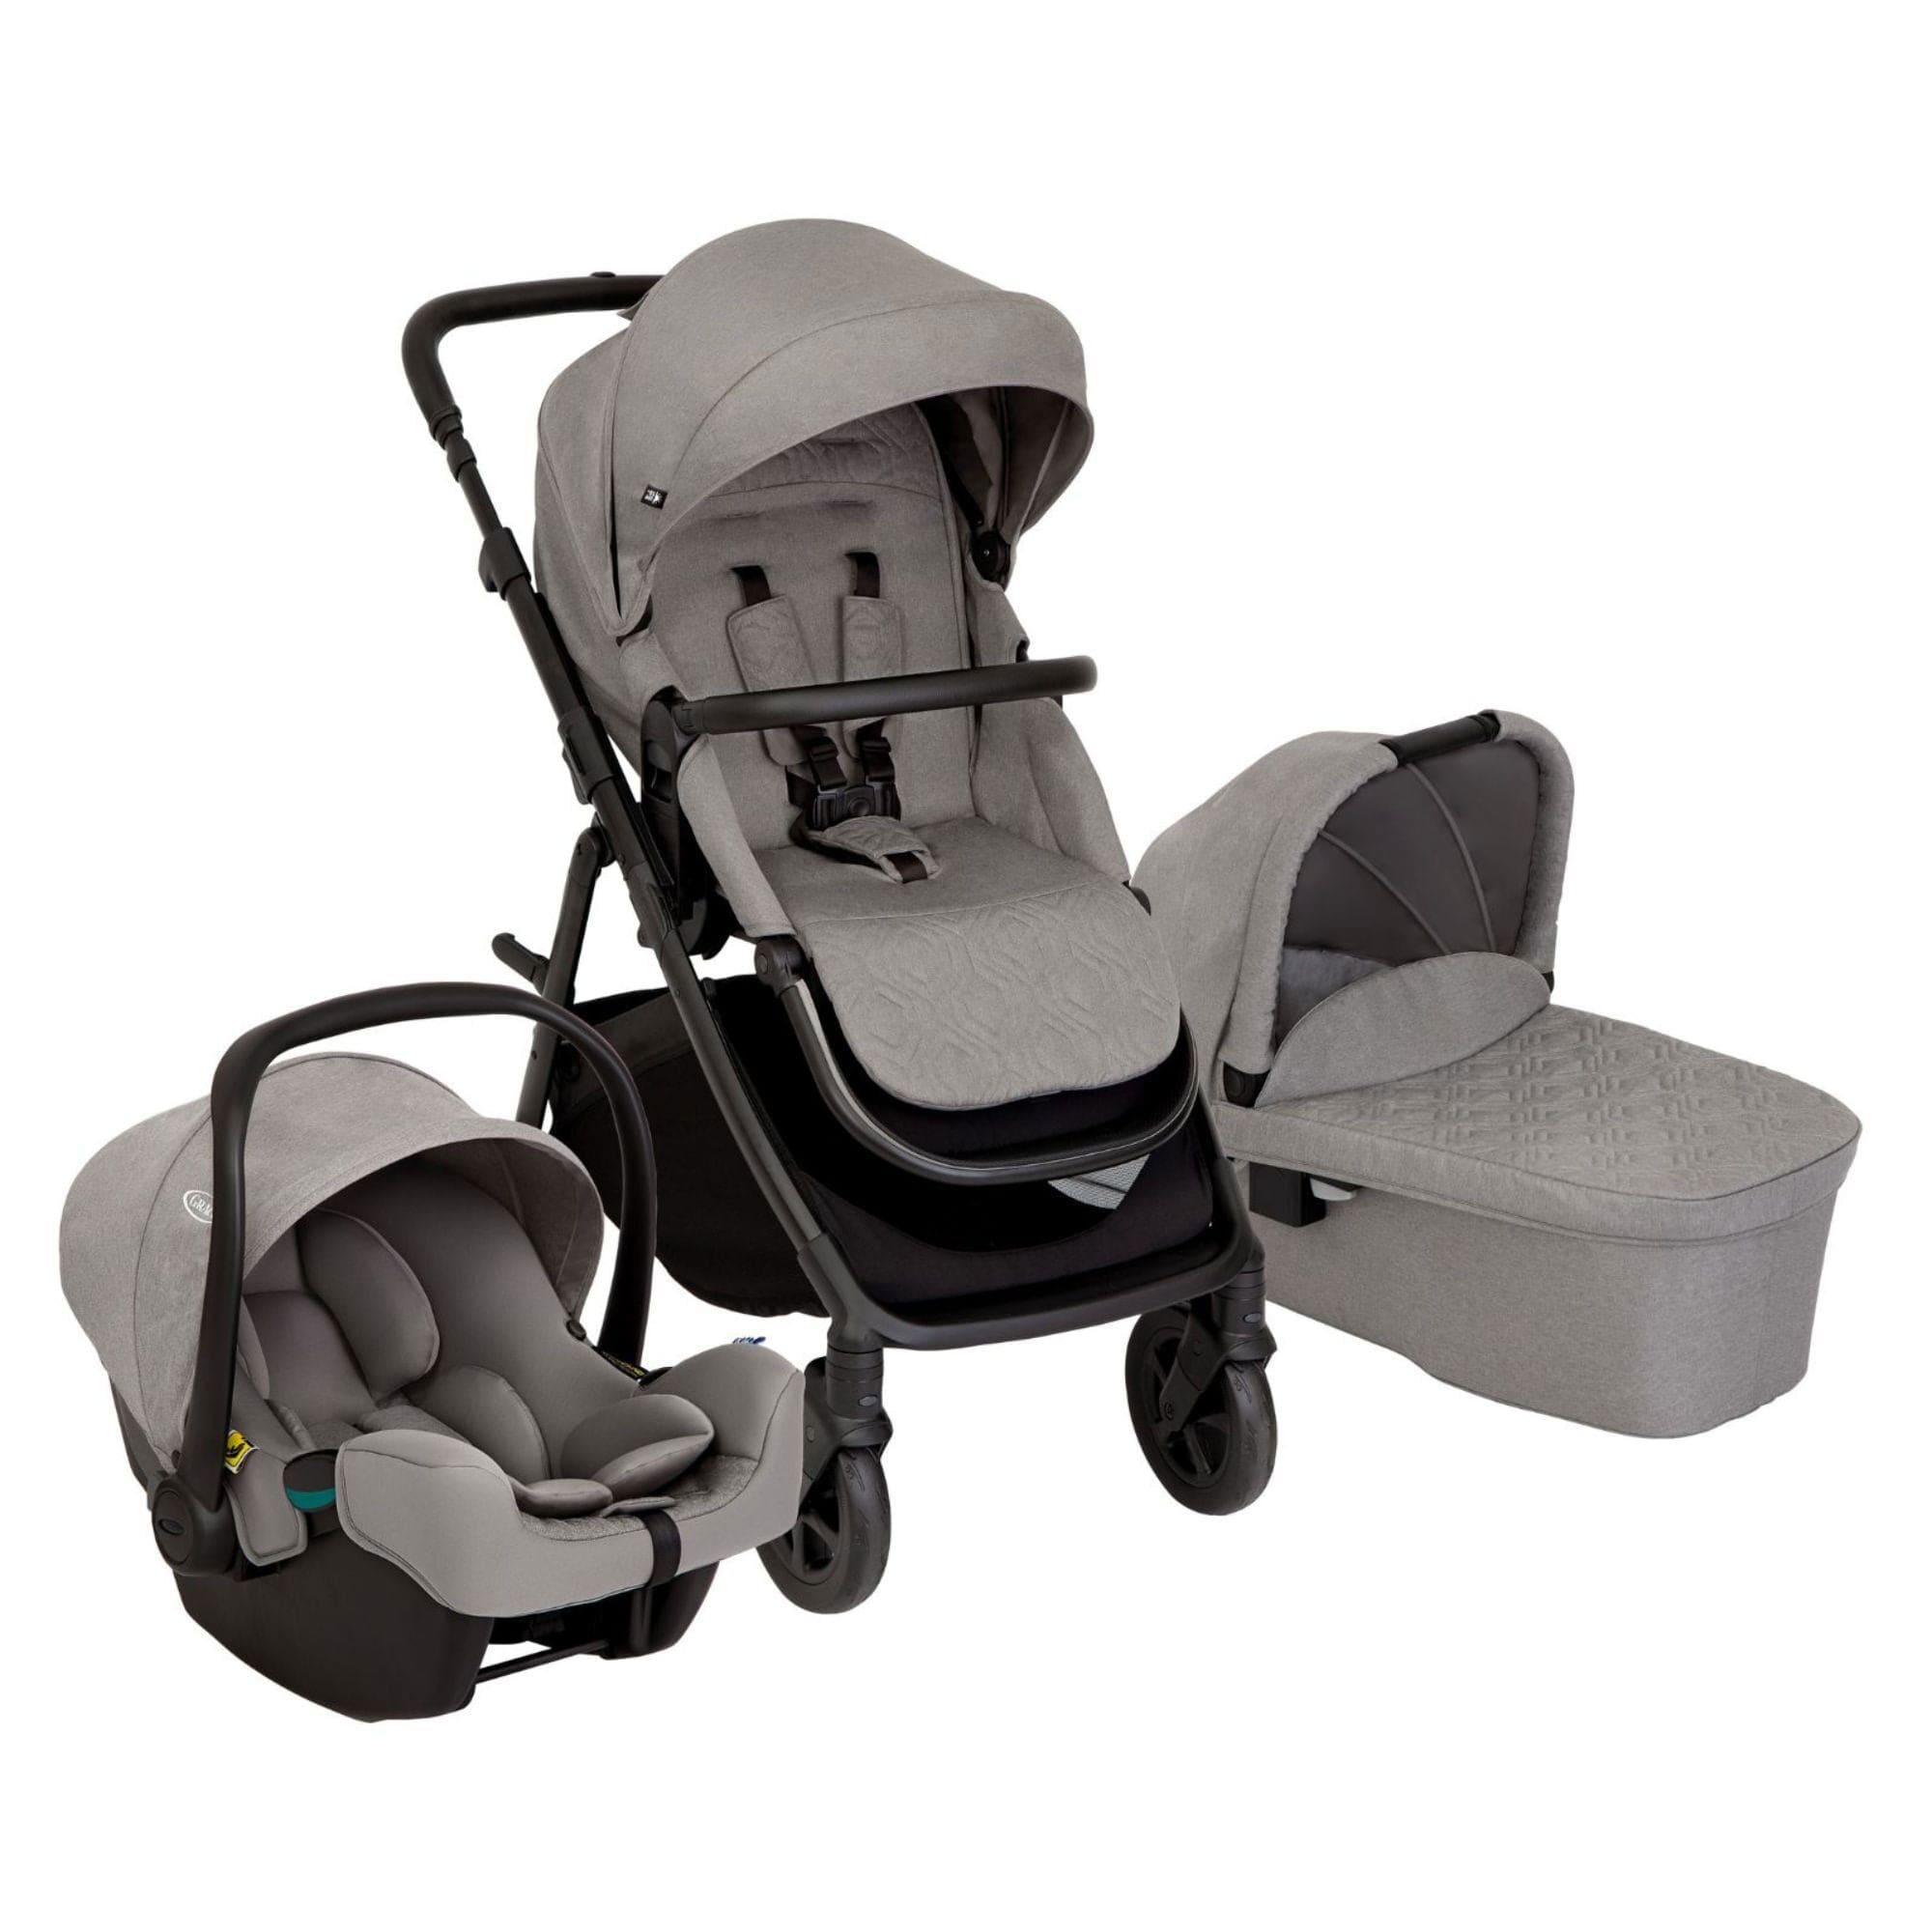 Graco Near2Me DLX Trio (Pushchair, Carrycot and Snuglite) in Ash Travel Systems GT1910AAASH000 5060624773808